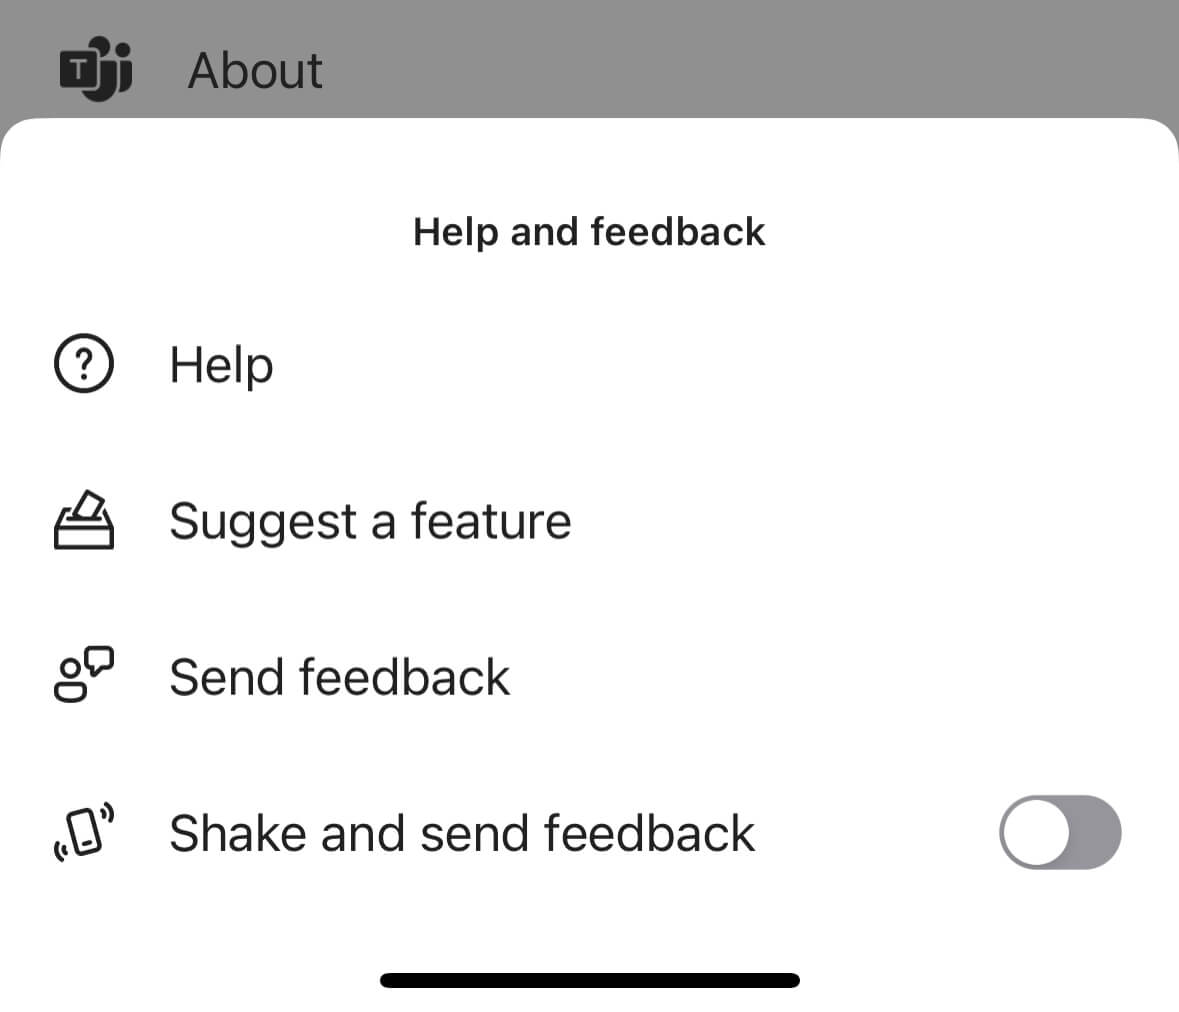 A non-modal help dialog has two send feedback options, with shake to send turned off